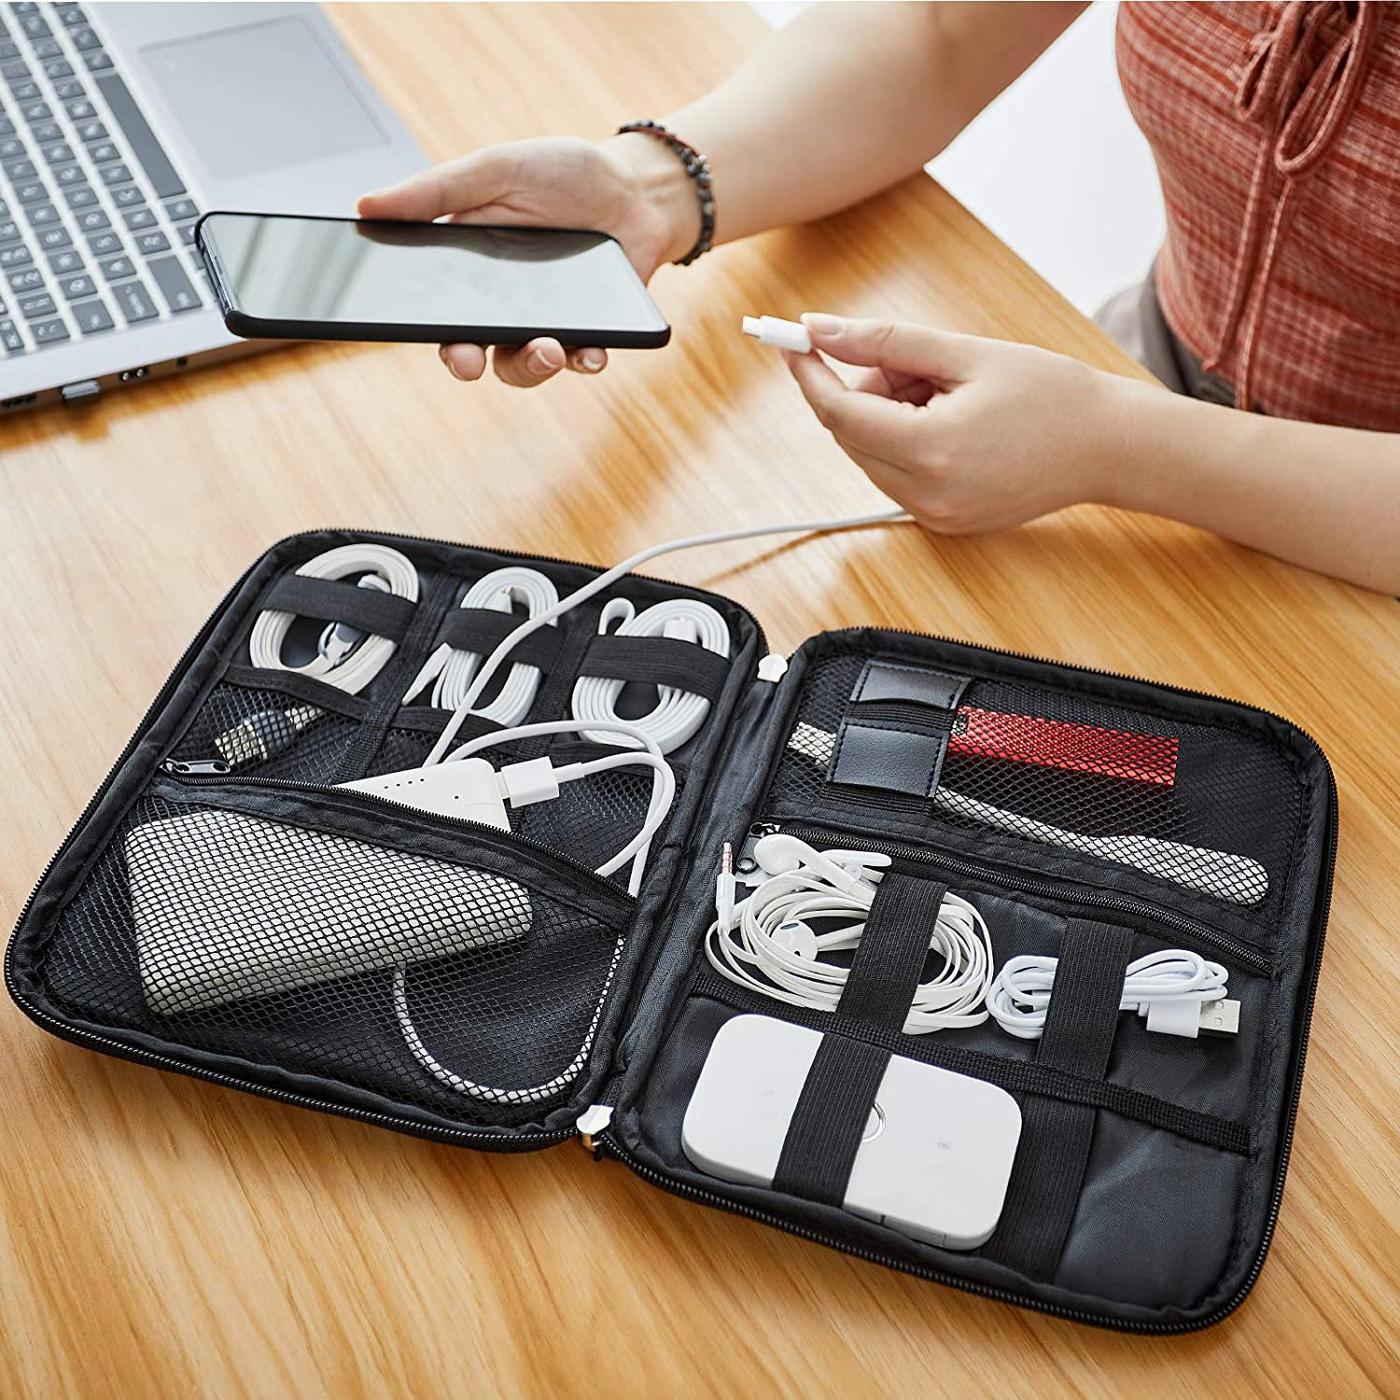 Electronic Organizers Travel Cable Storage, Electronics Accessories Cases for Cable, Charger, Phone, USB, SD Card